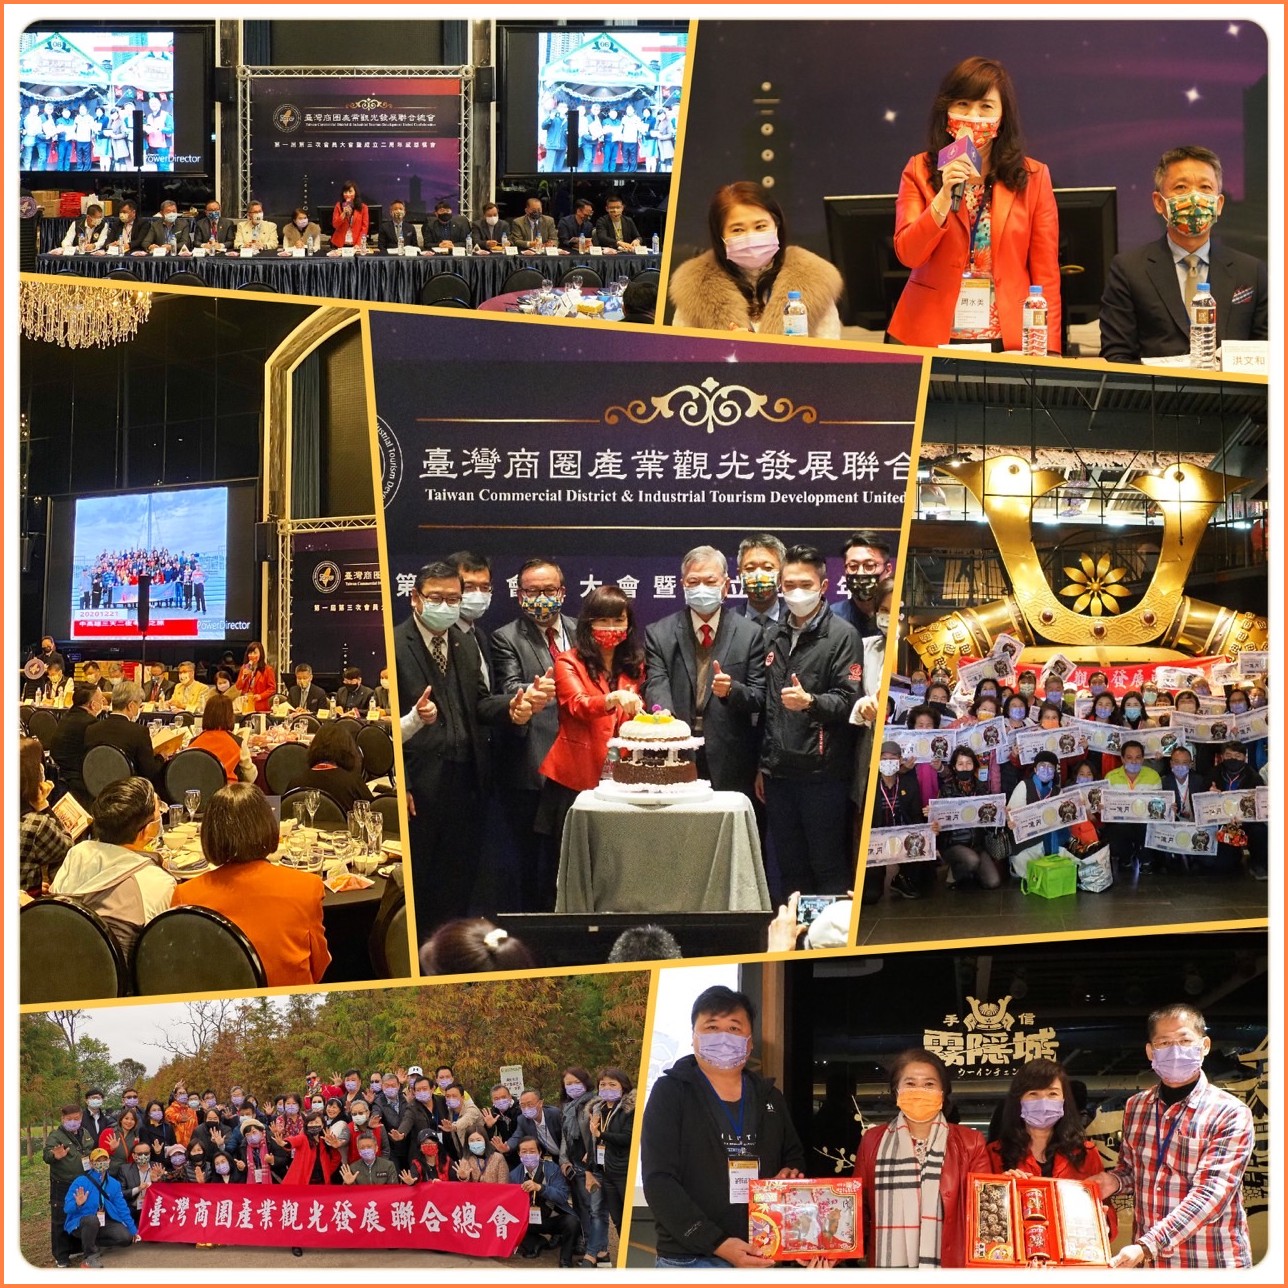 Taiwan Business District Industry Tourism Development Federation celebrates the second Anniversary of Taoyuan Action